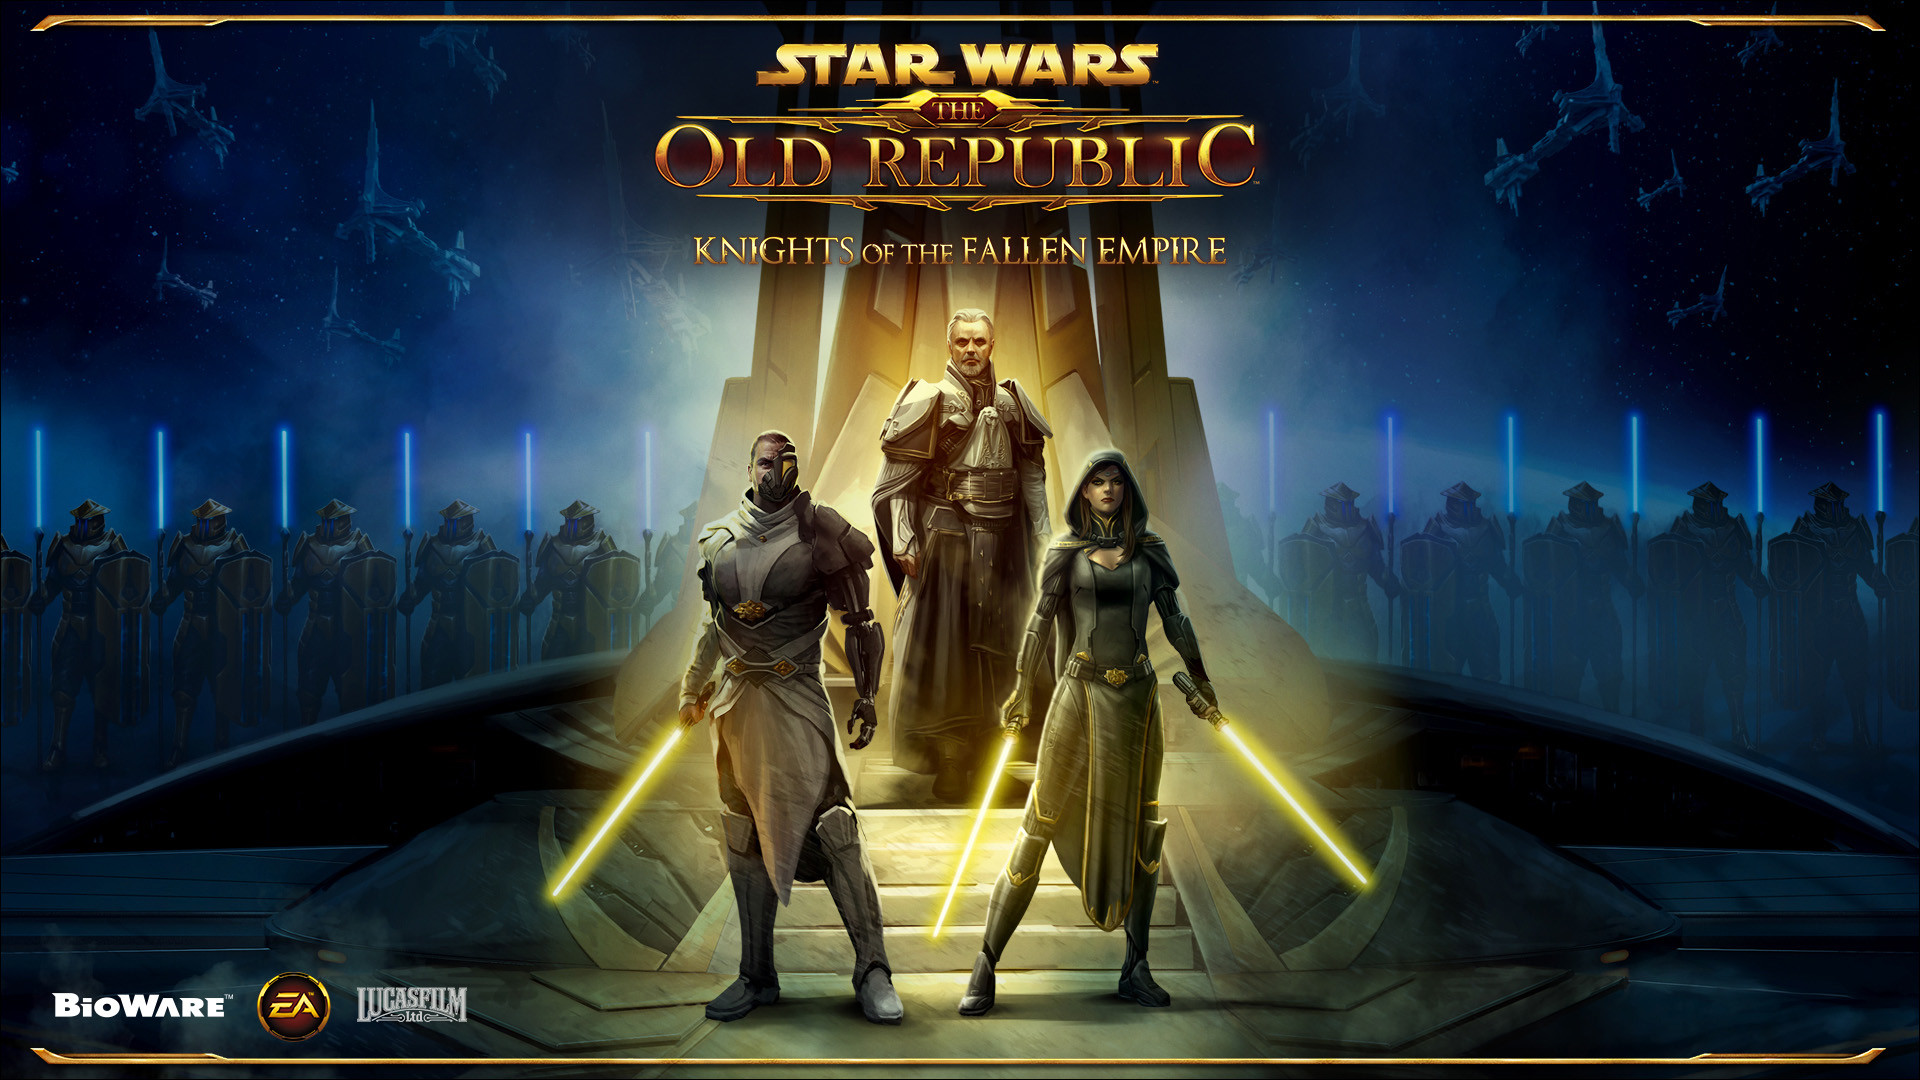 1920x1080 ... Images Star Wars The Old Republic Icon Desktop Wallpaper by swmand4 on .